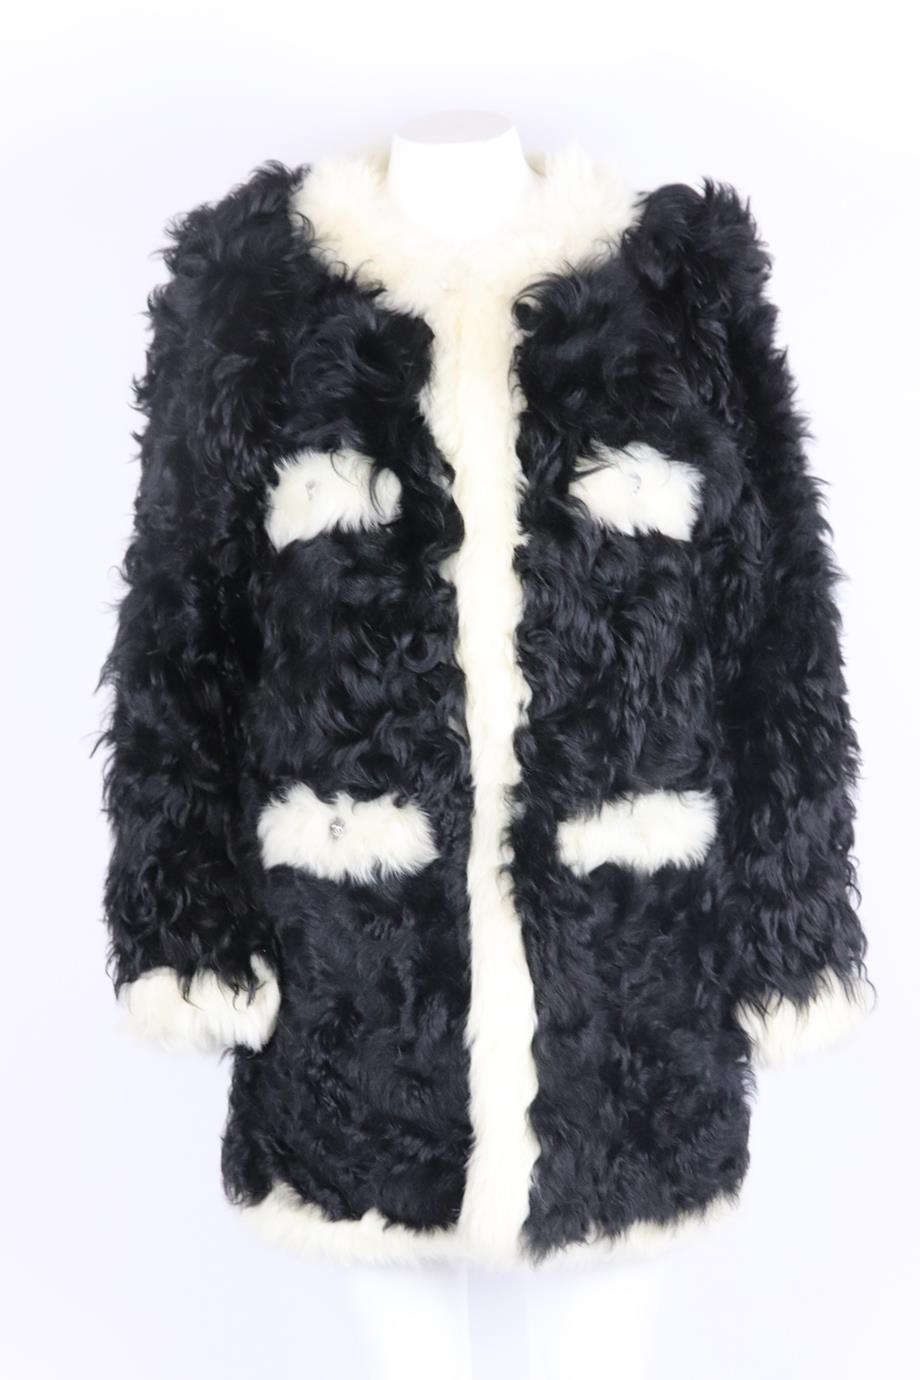 Chanel 2021 two tone shearling coat. Black and cream. Long sleeve, crewneck. Hook and eye fastening at front. 100% Lambskin; lining: 100% silk. Size: FR 46 (UK 18, US 14, IT 50). Shoulder to shoulder: 19 in. Bust: 42 in. Waist: 41 in. Hips: 42 in.